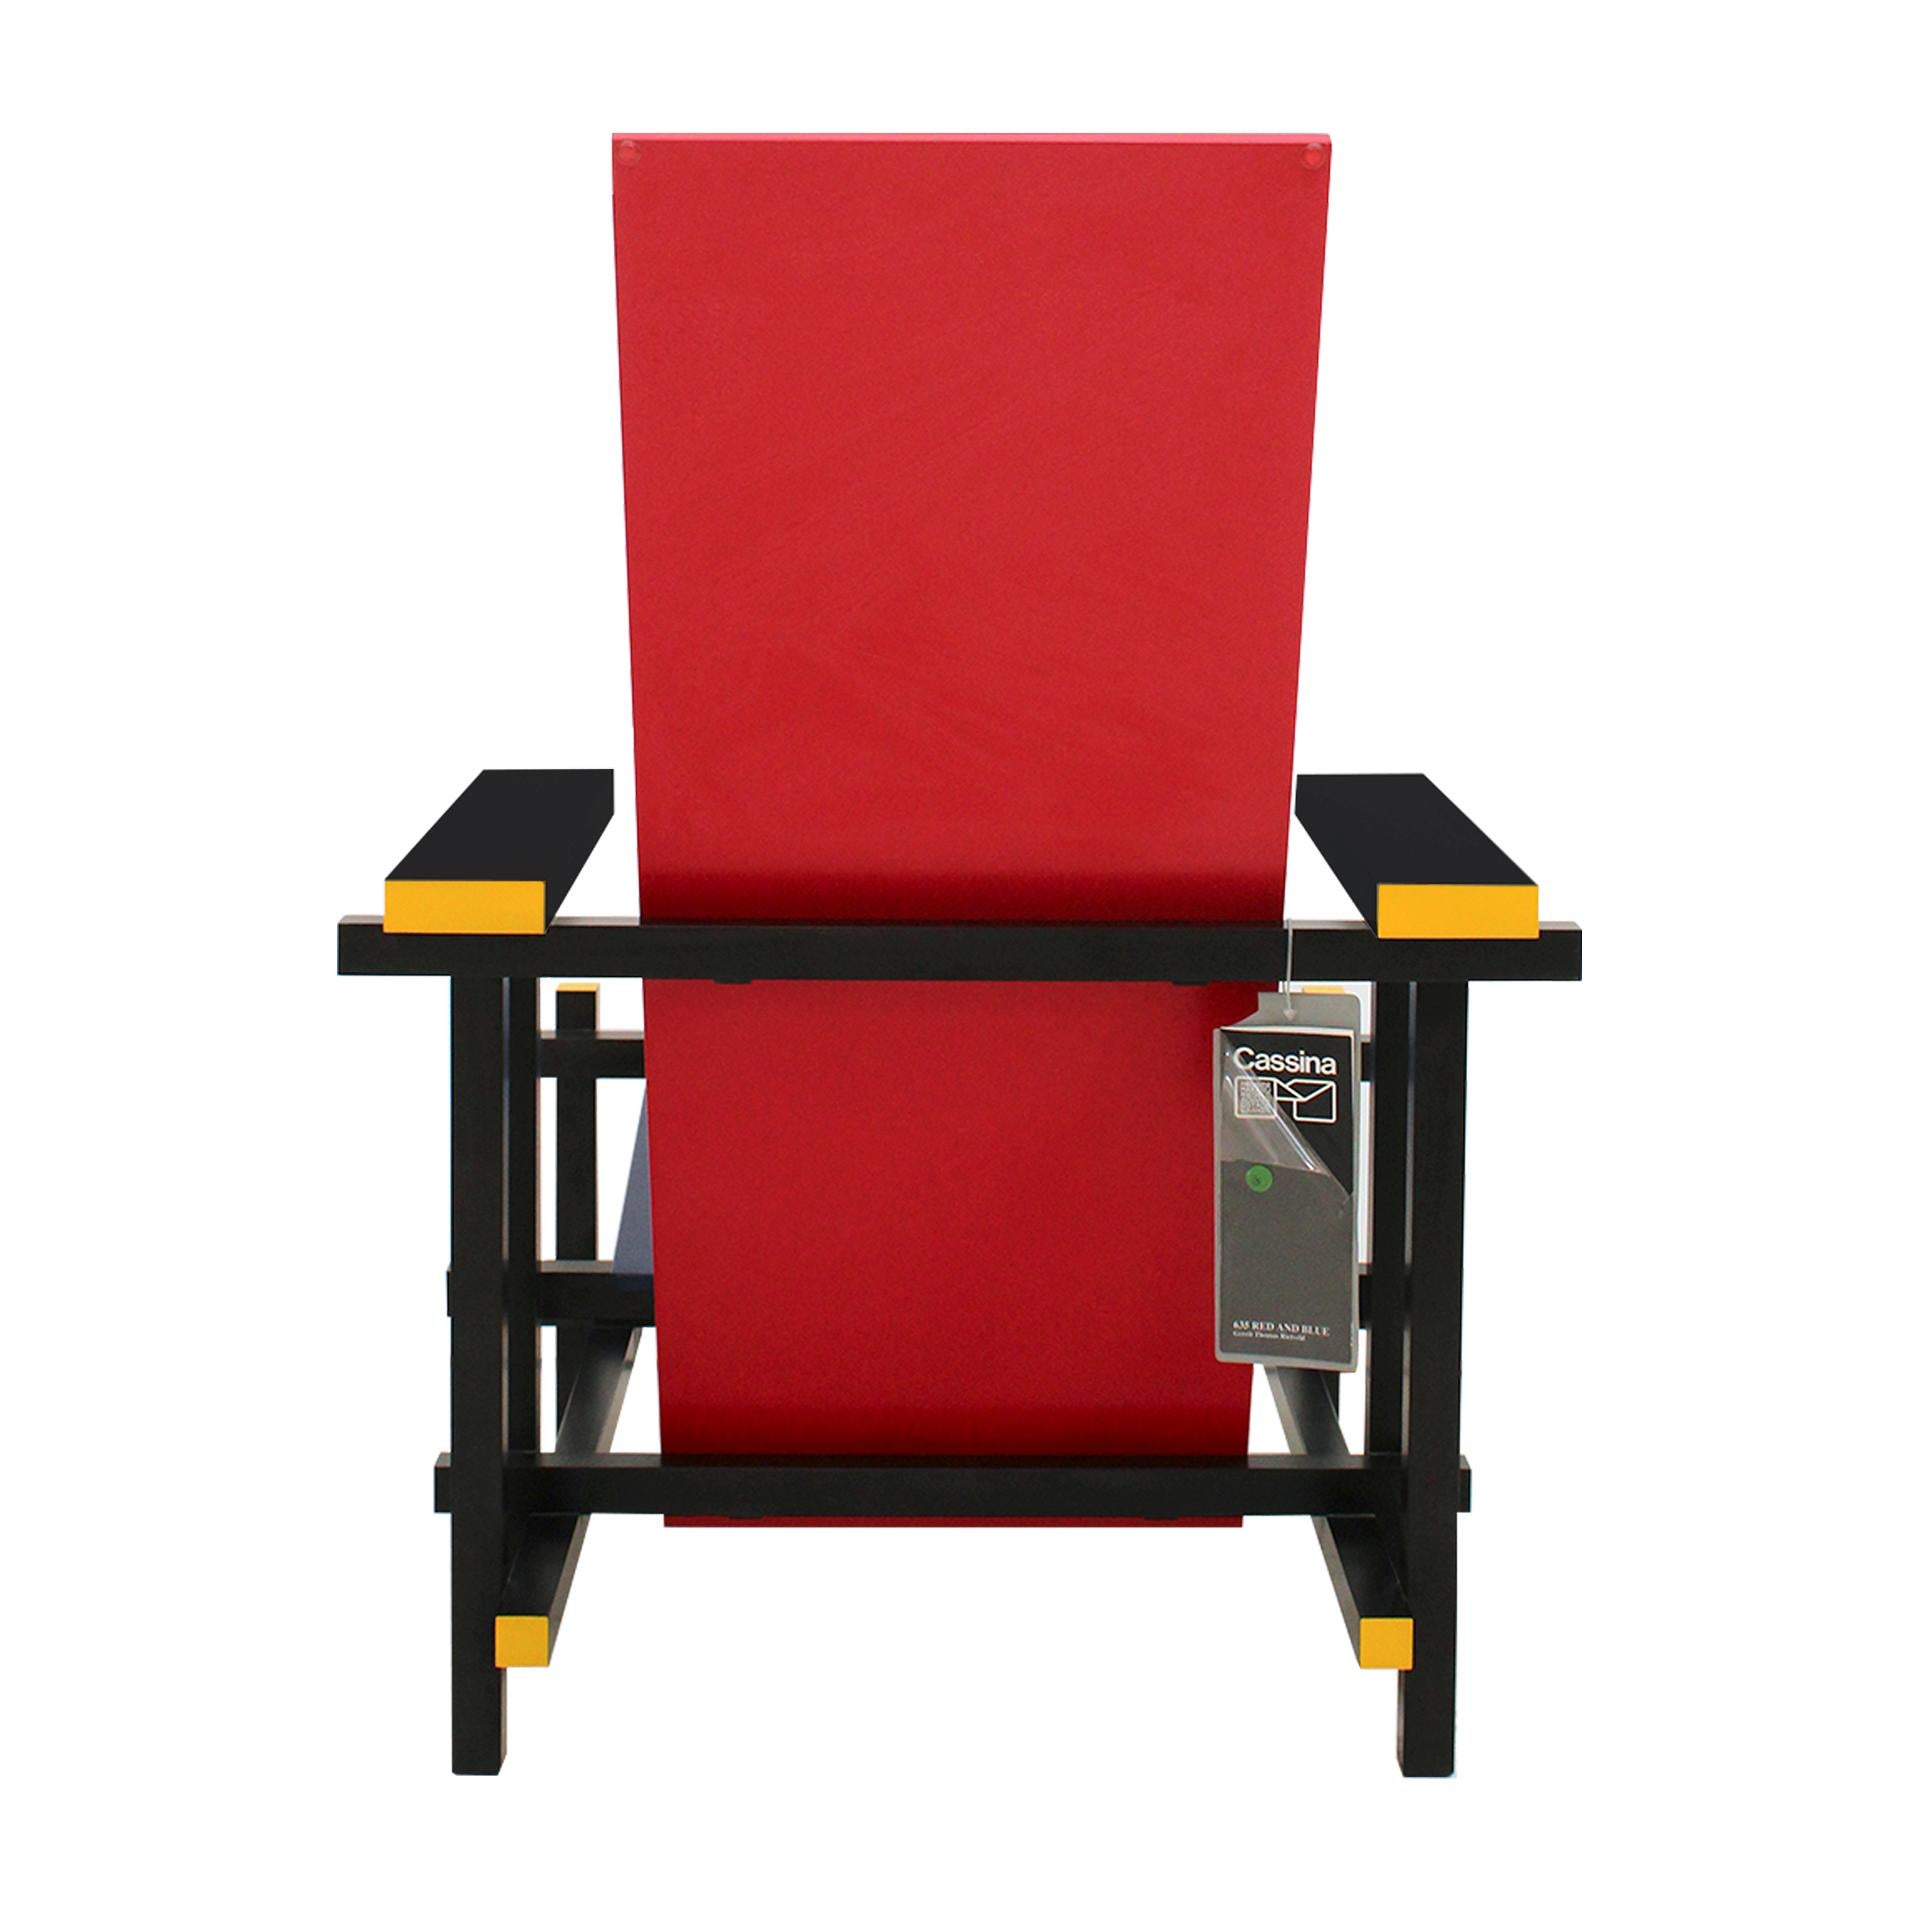 Modern Red and Blue Chair Designed by Gerrit T. Rietveld for Cassina